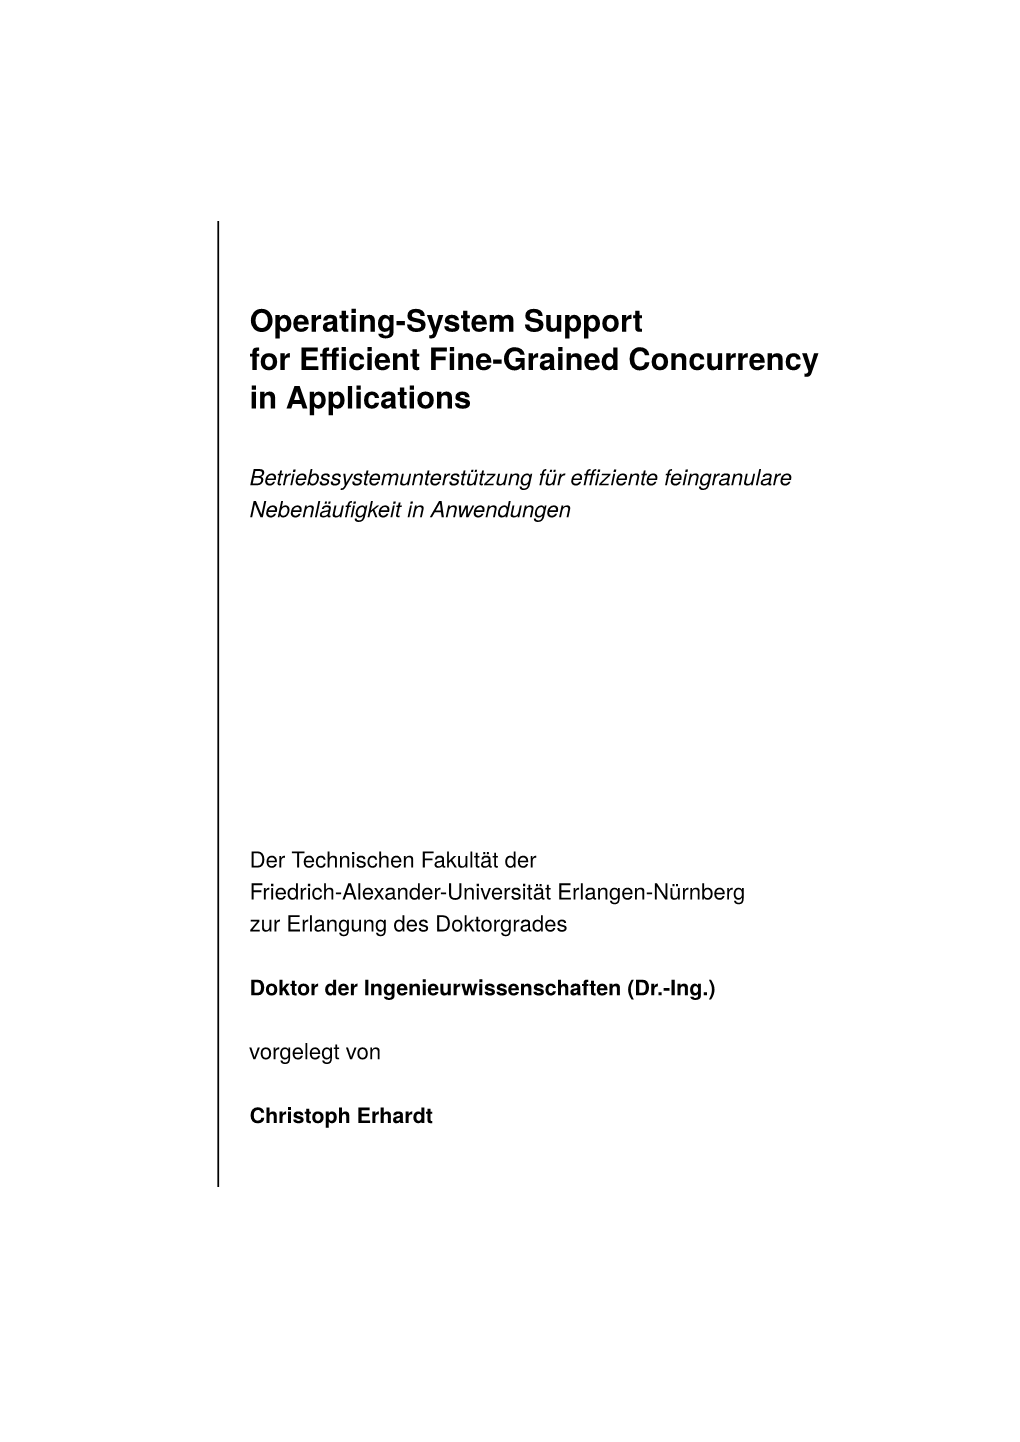 Operating-System Support for Efficient Fine-Grained Concurrency in Applications